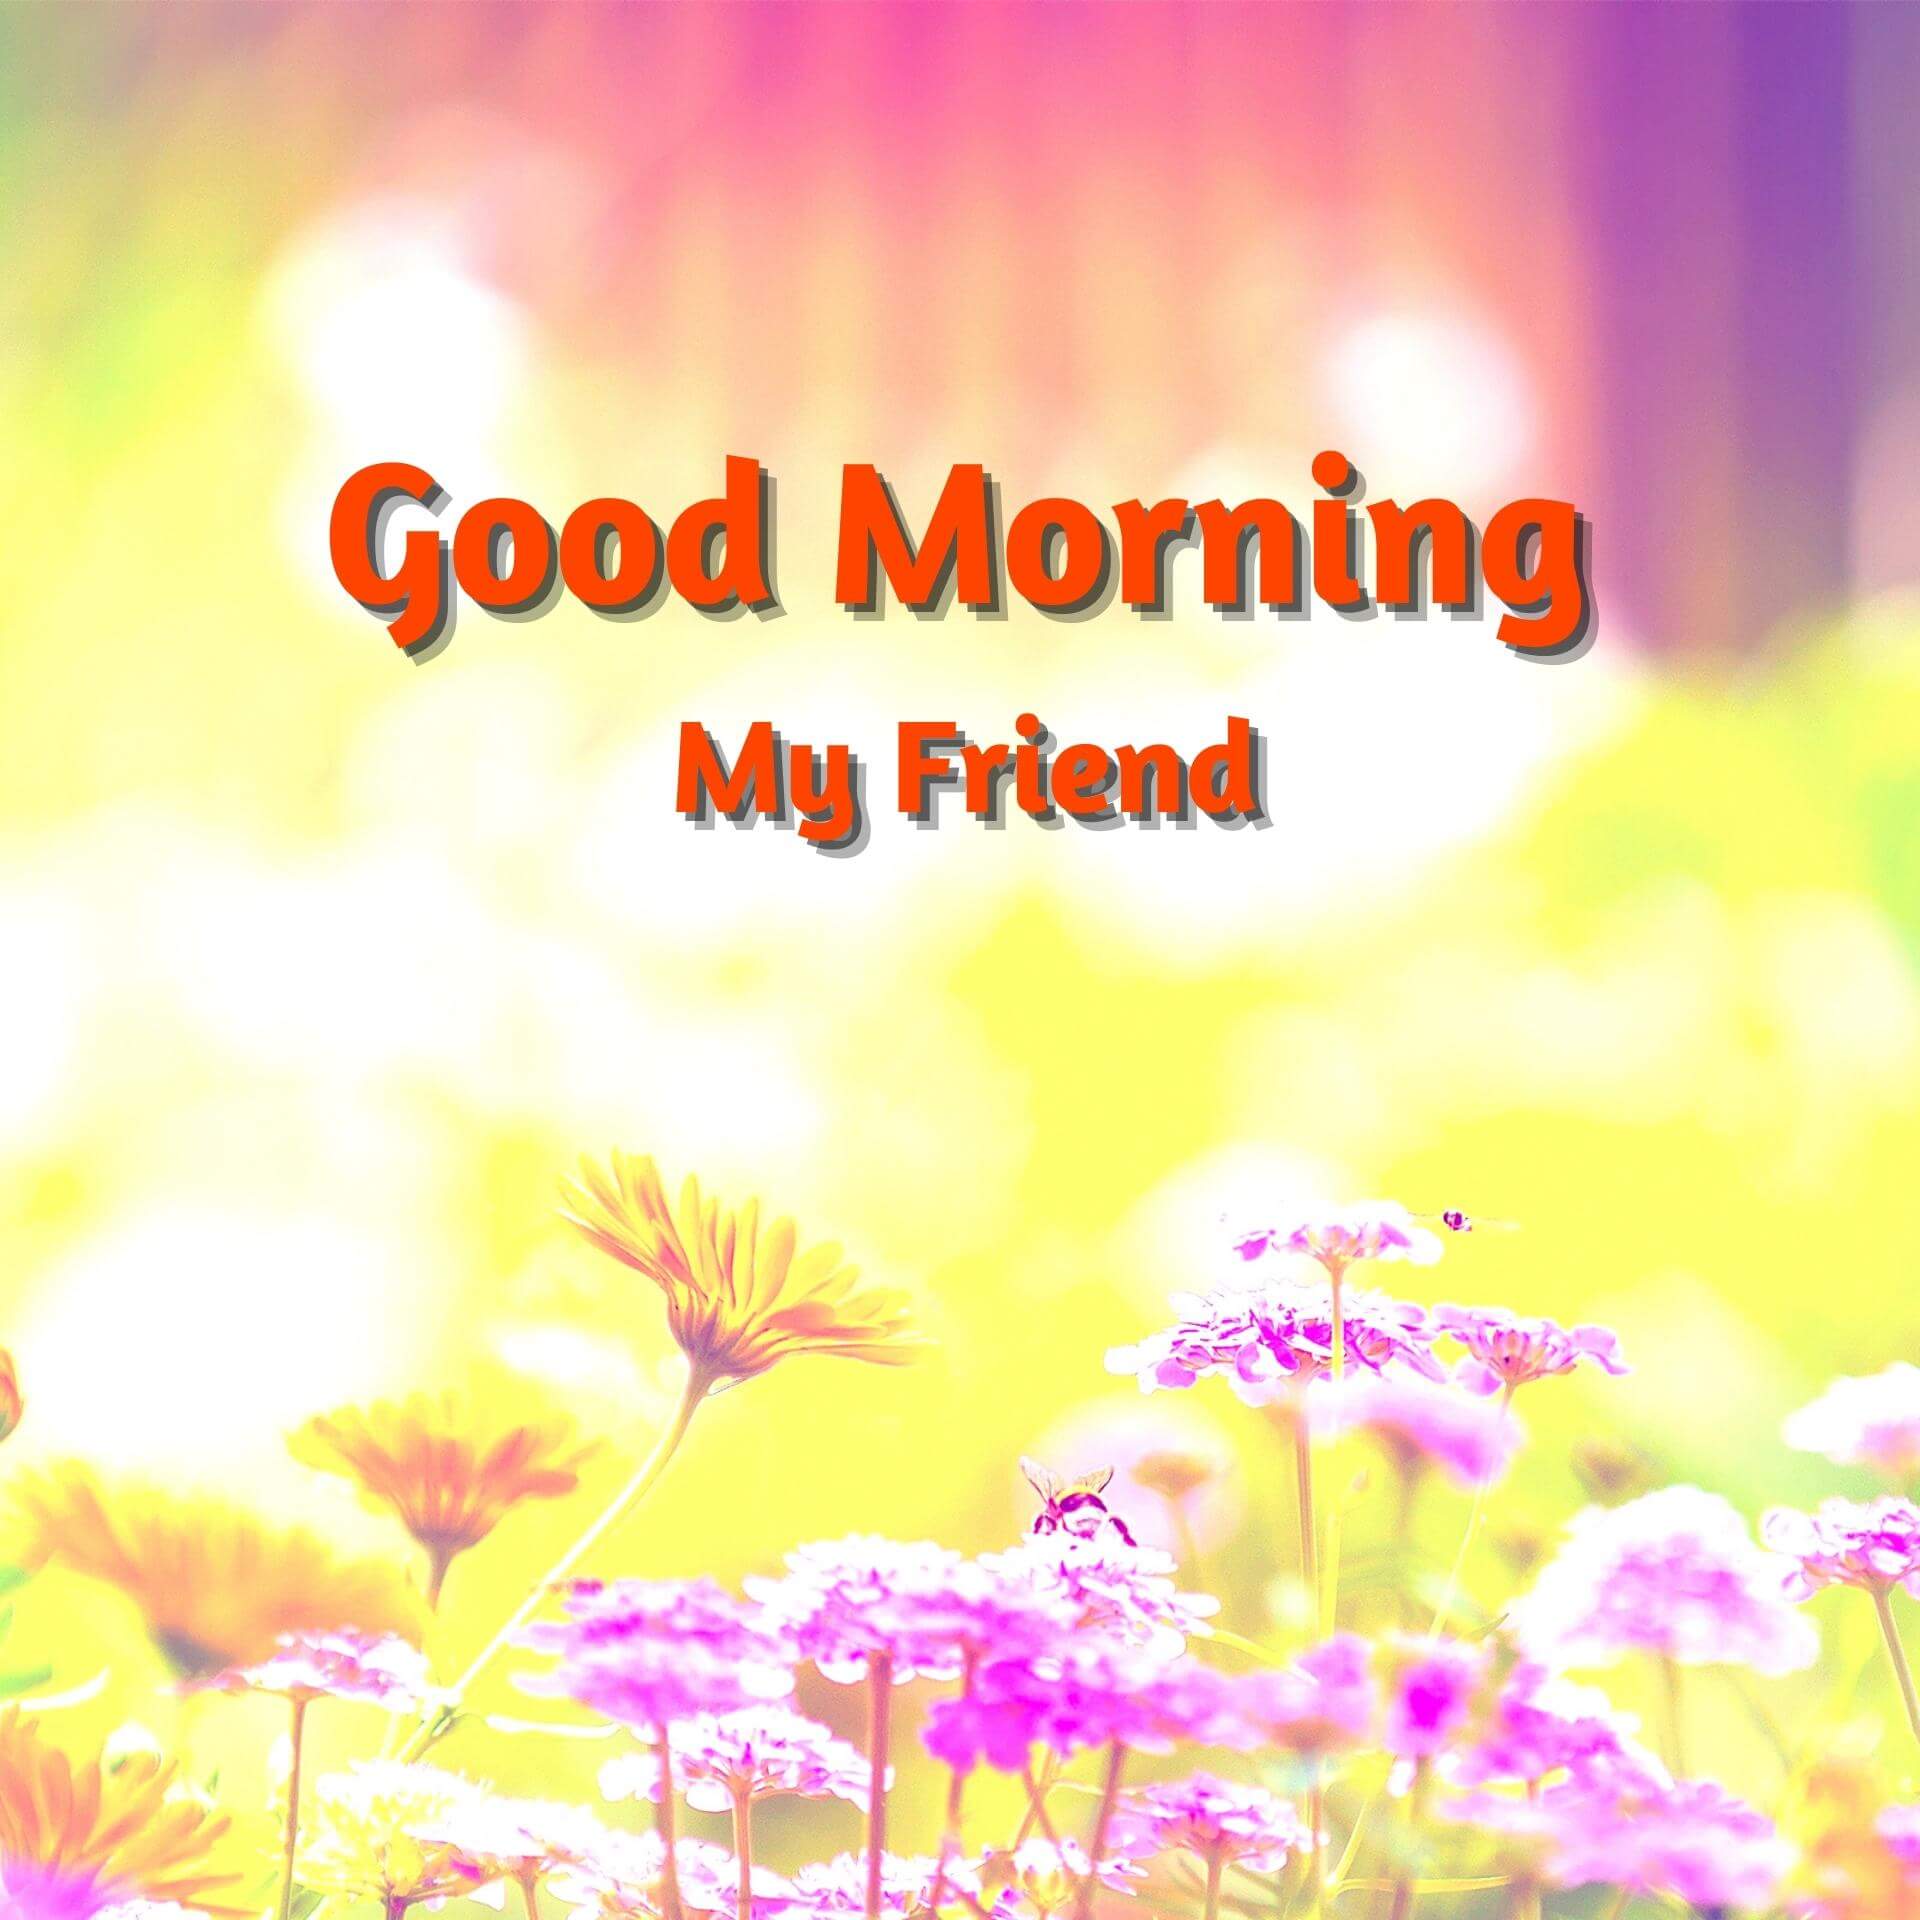 good morning wishes images download